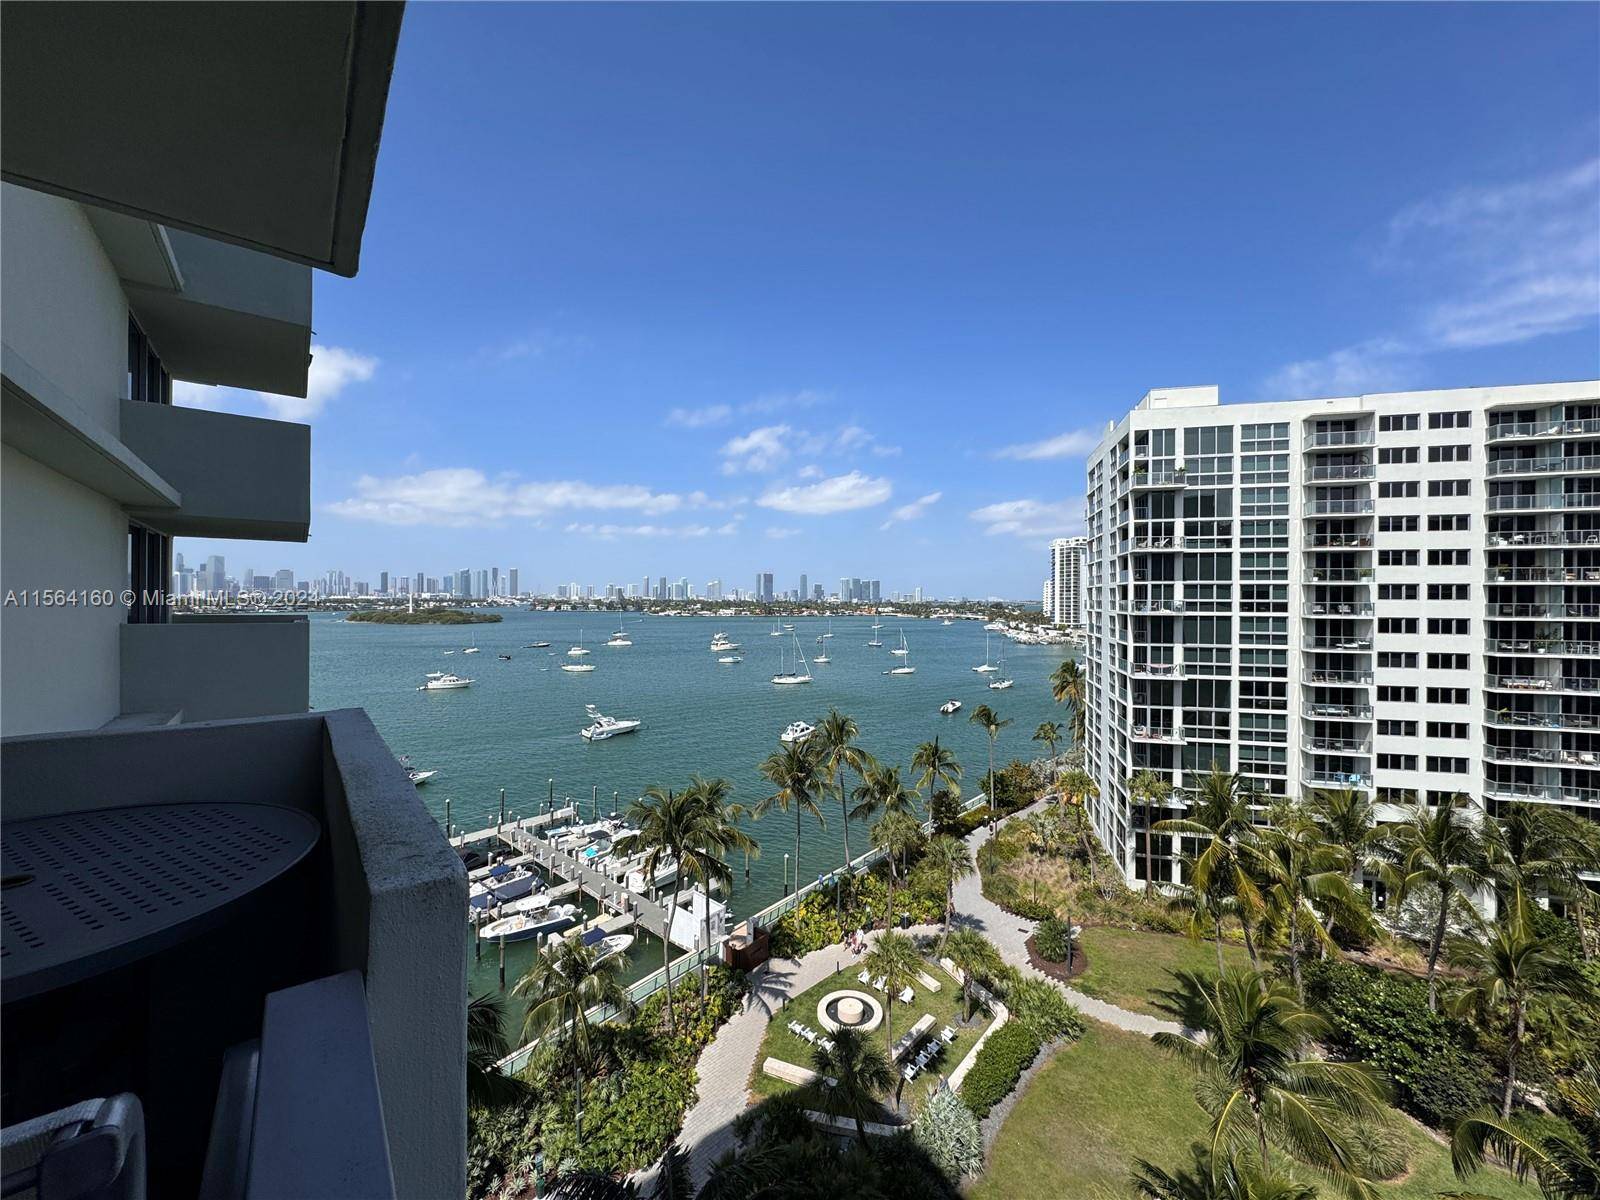 Presenting a distinctive 1 bedroom residence situated in the esteemed Bay Road neighborhood of Miami Beach.